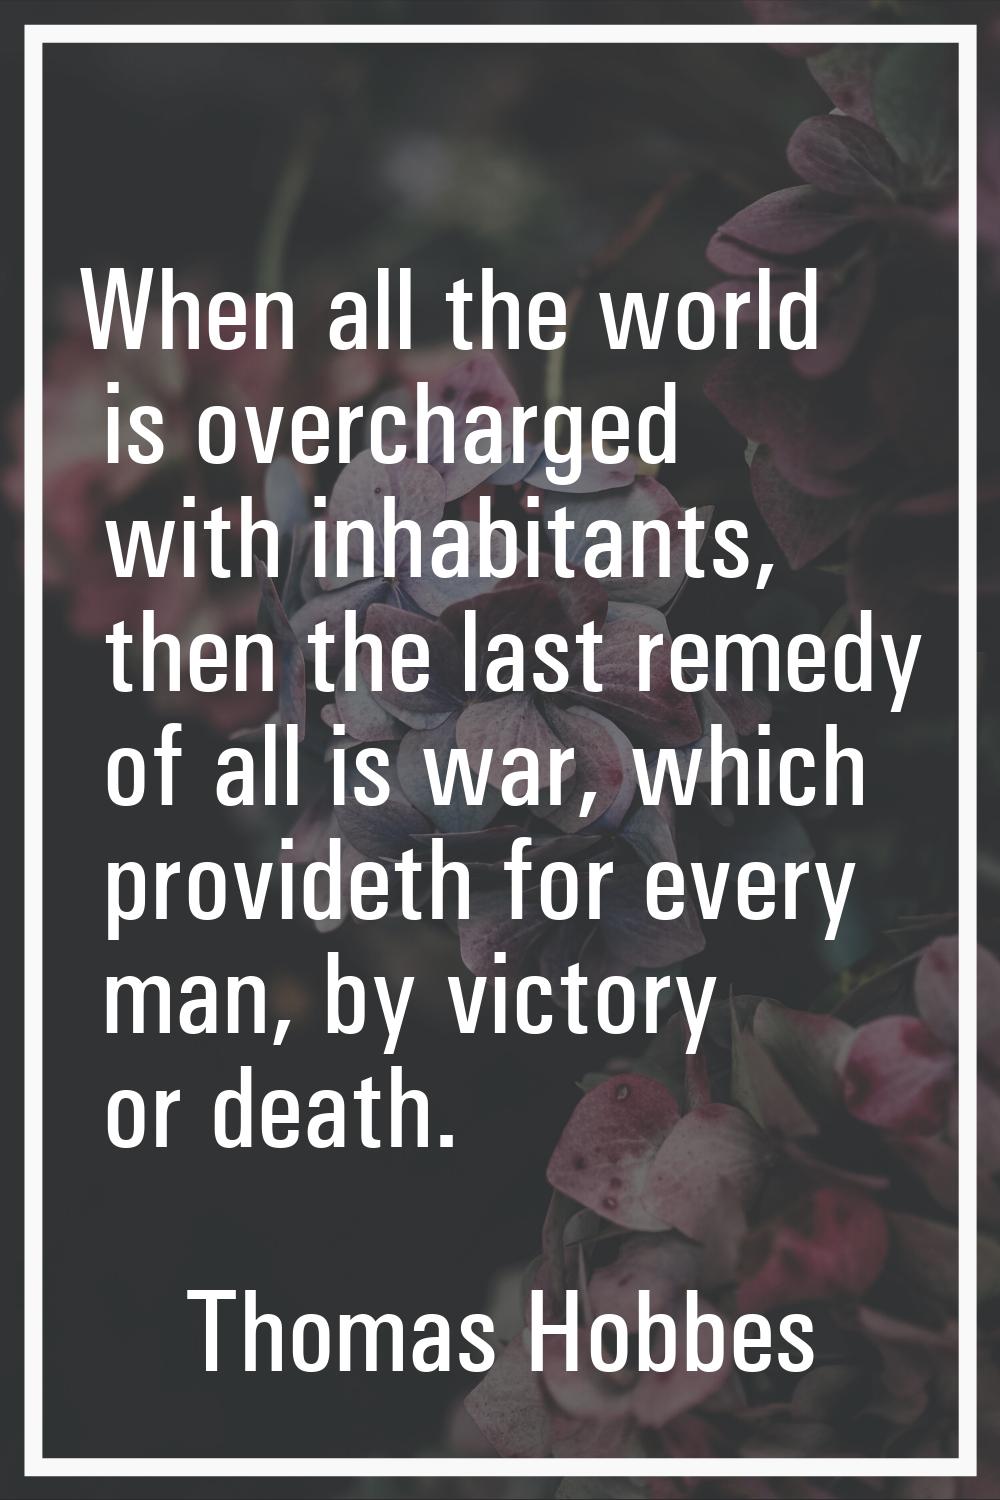 When all the world is overcharged with inhabitants, then the last remedy of all is war, which provi